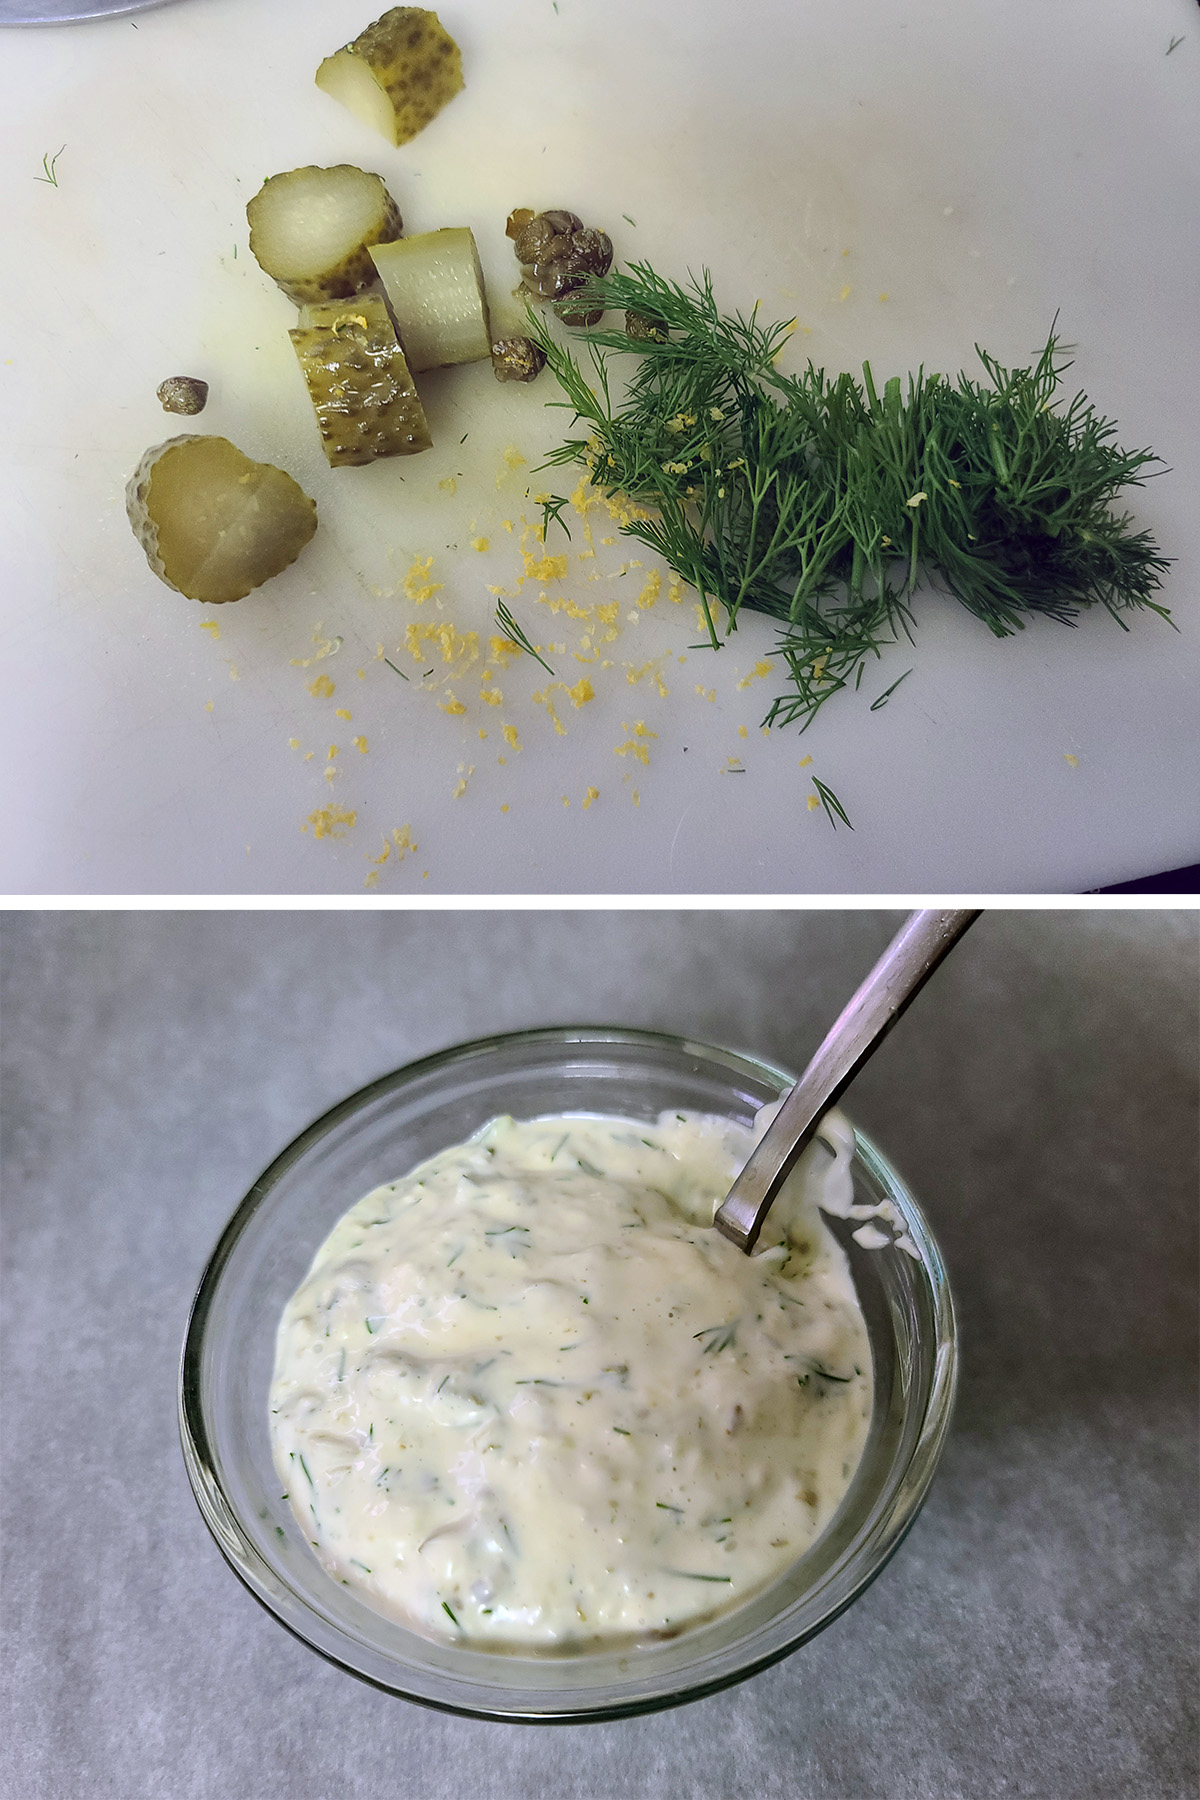 A 2 part image showing the ingredients for the keto tartar sauce.